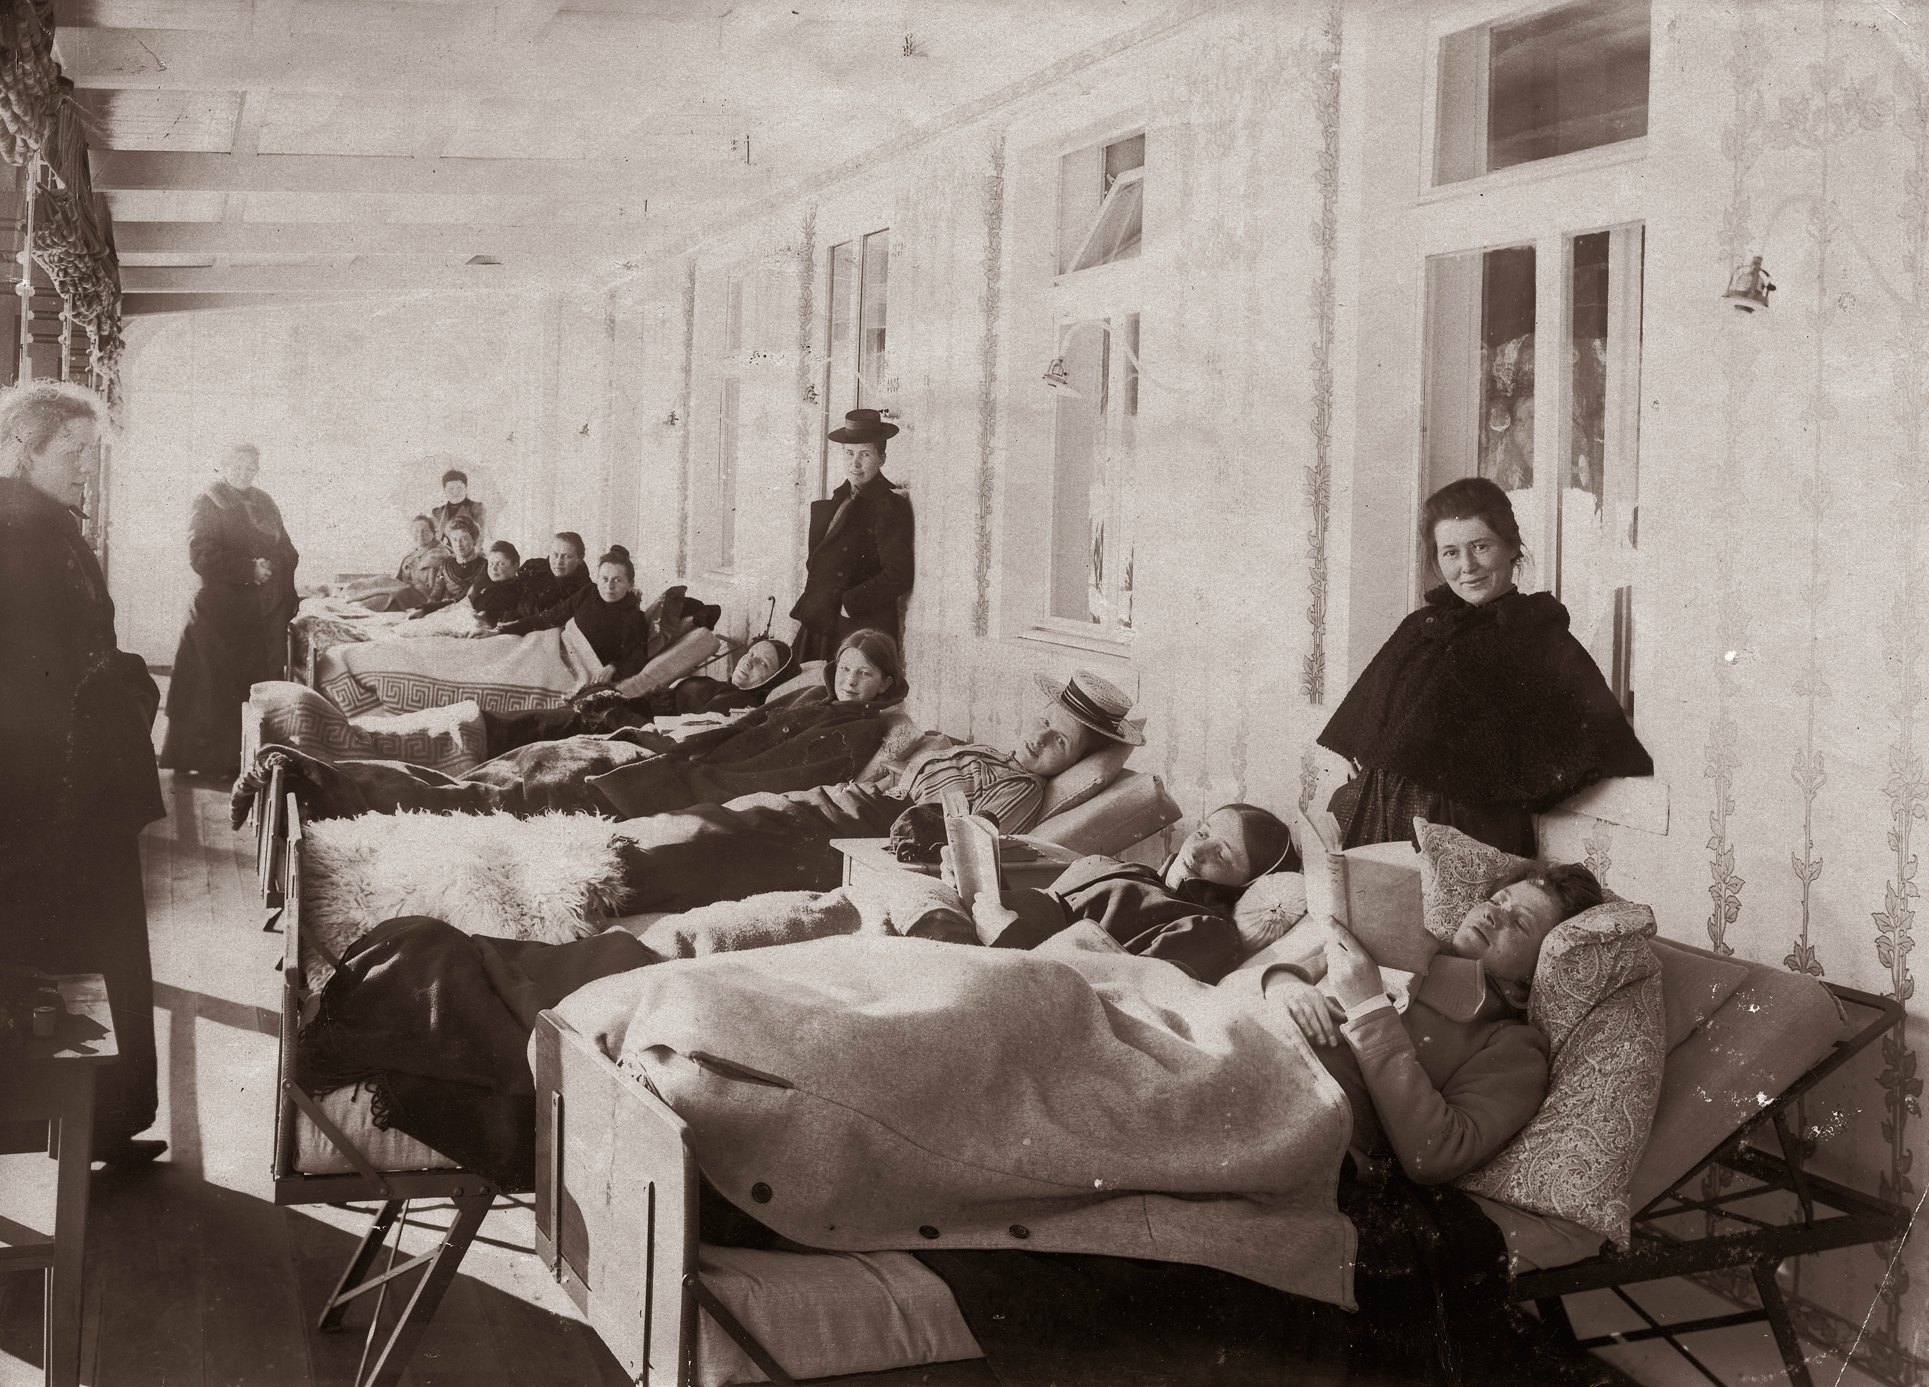 Patients at a sanatorium in Davos, about 1900.